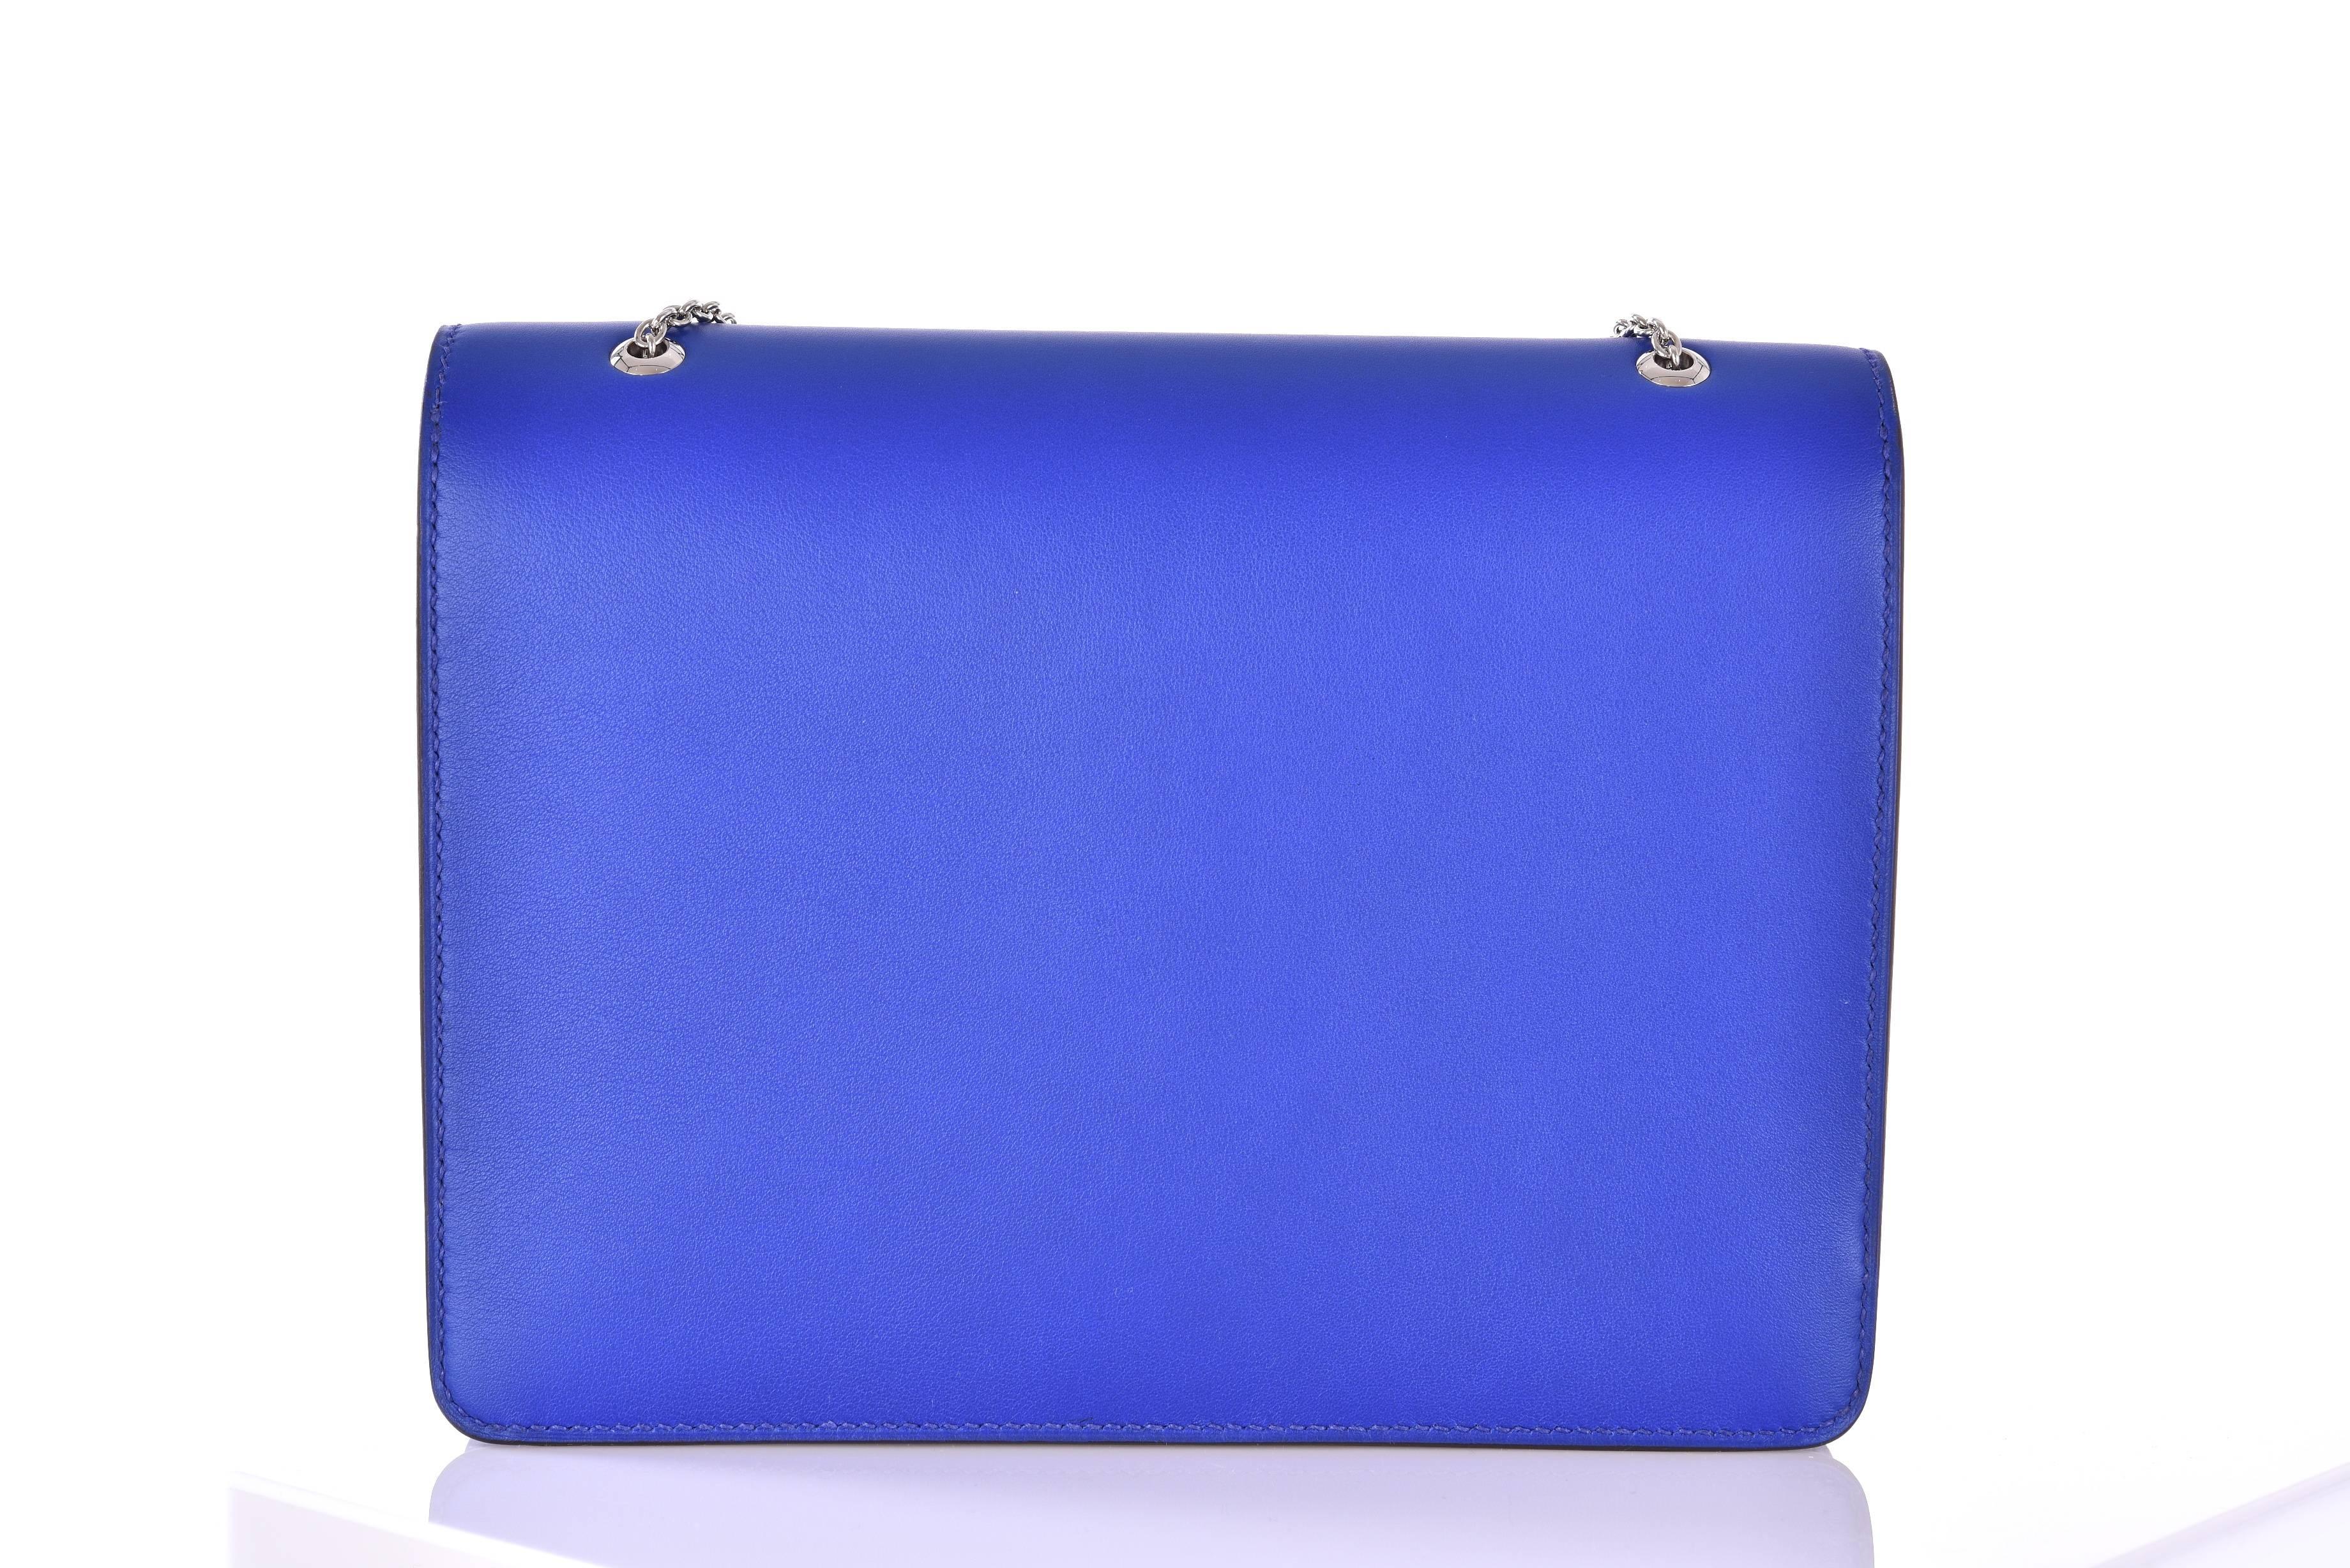 Hermes Catenina Bag Clutch Blue Electric Gorgeous New Bag! JaneFinds at ...